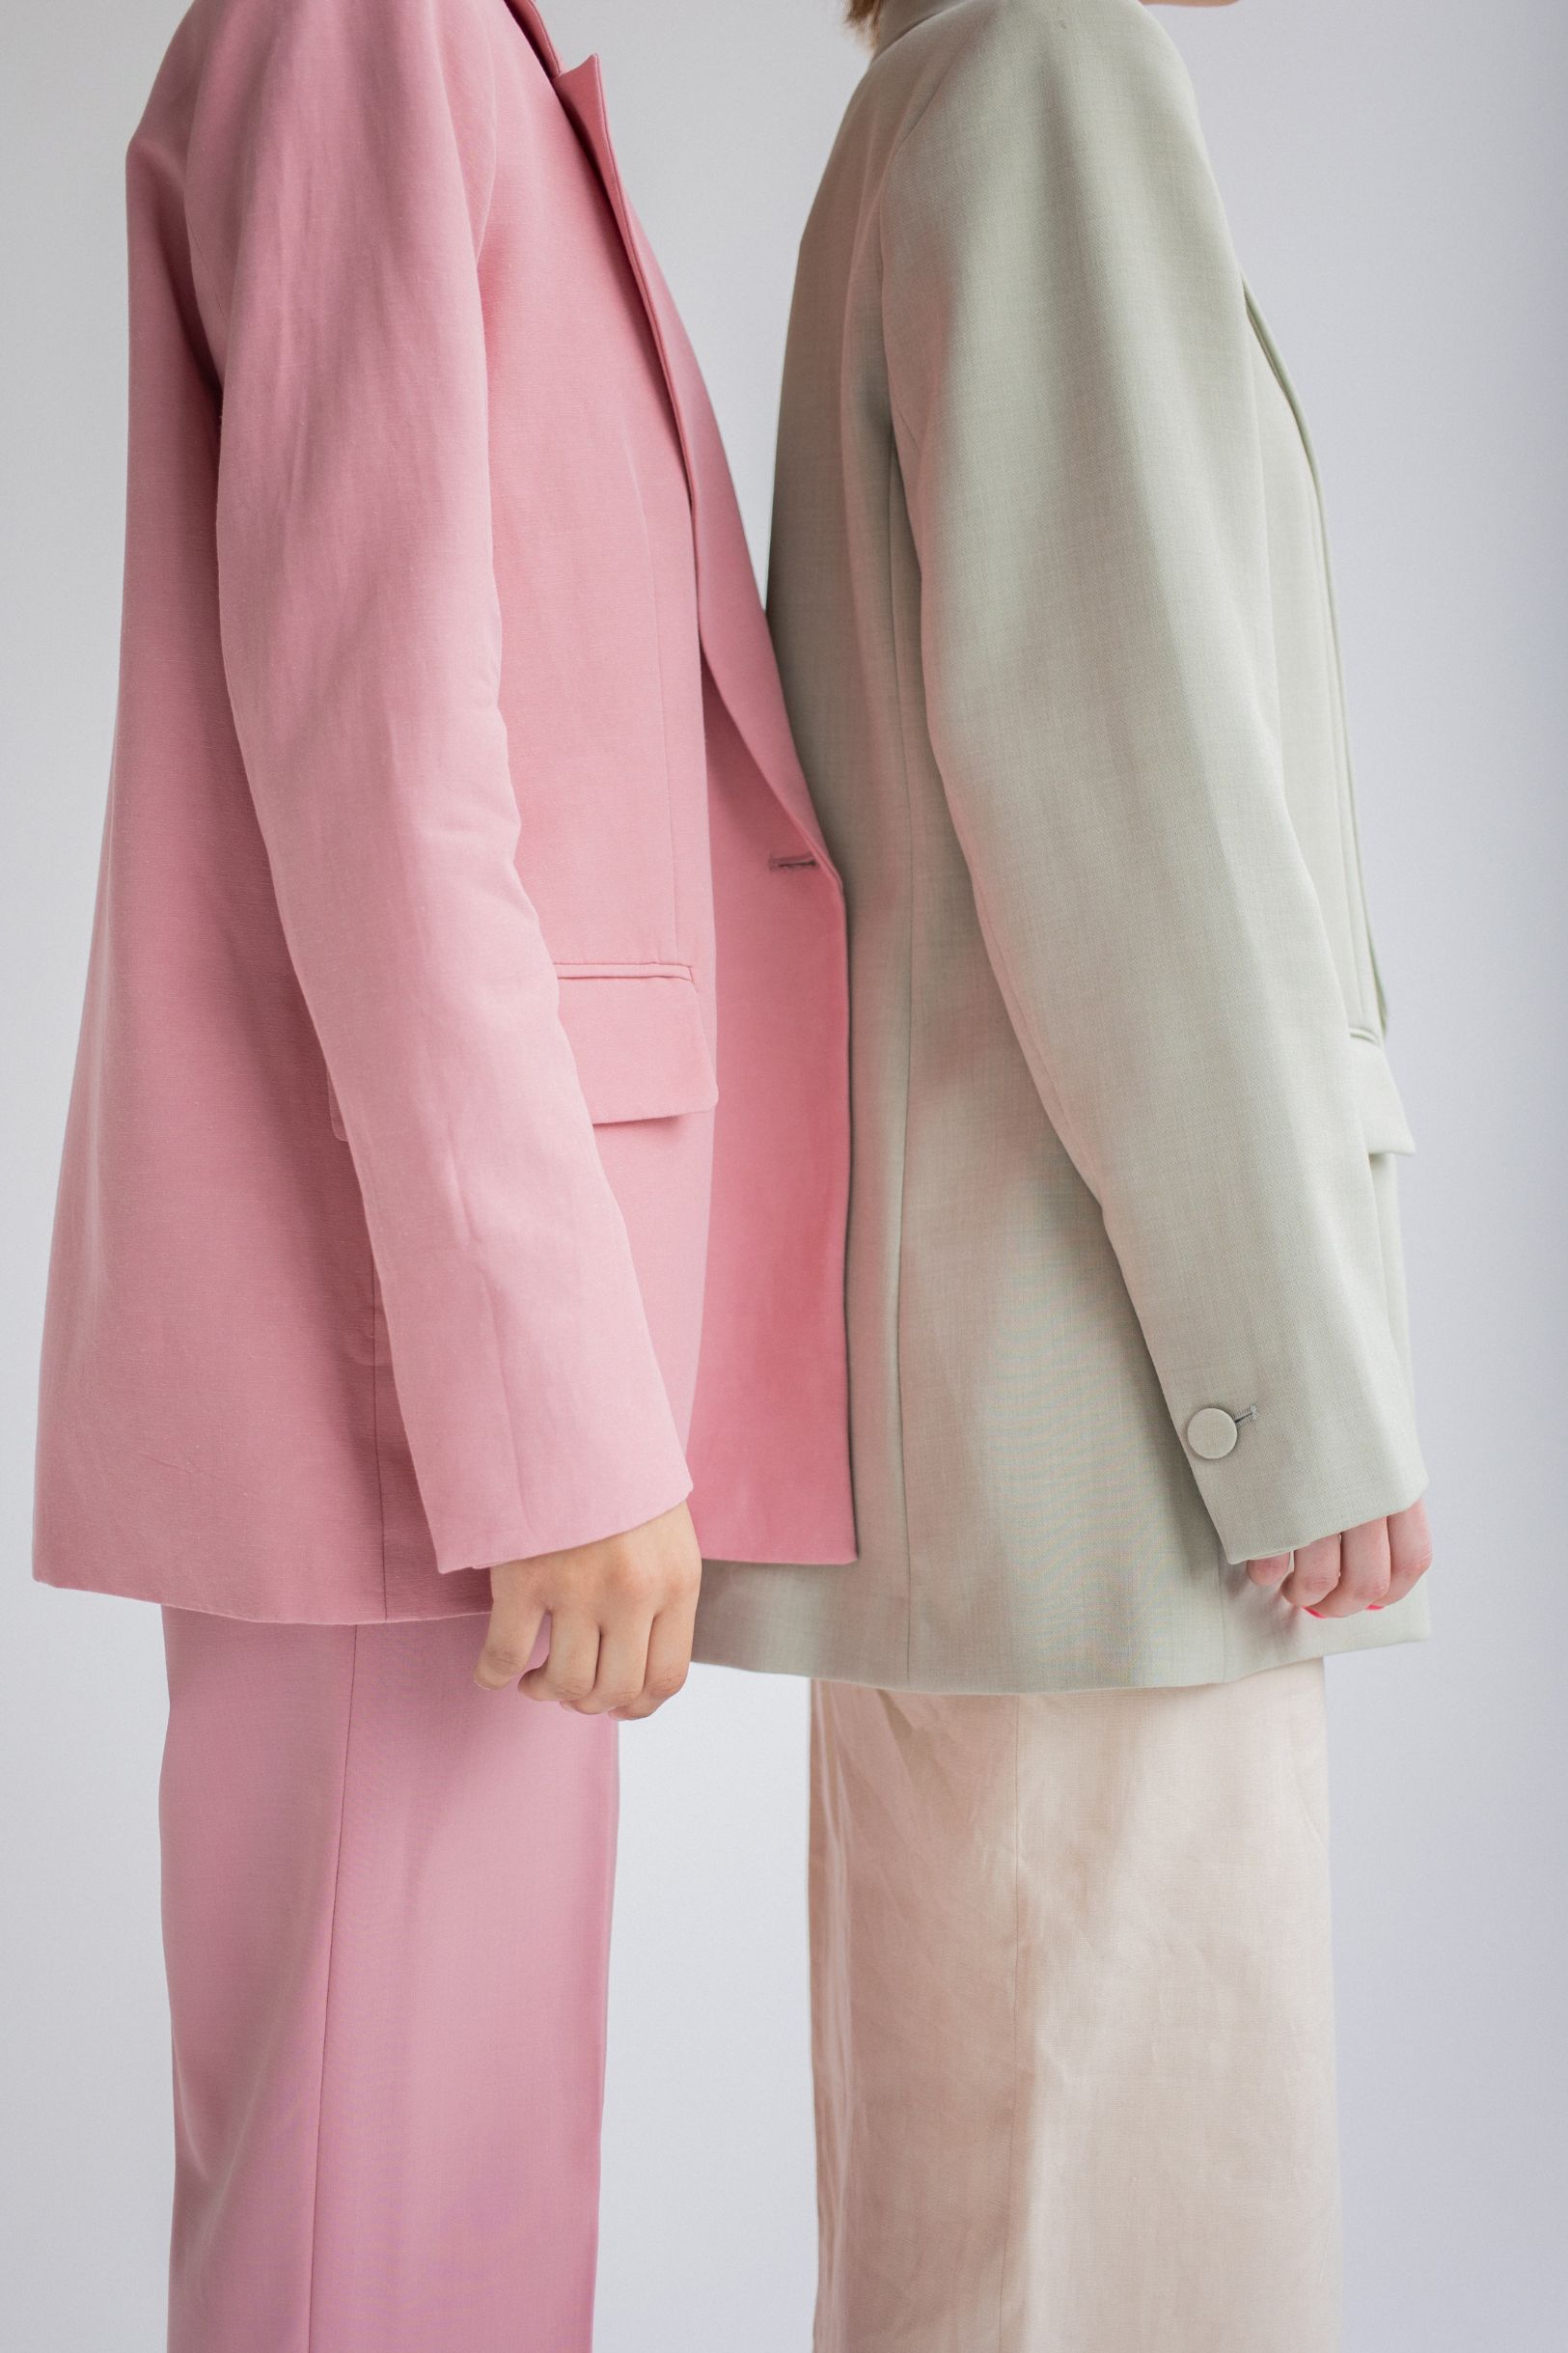 Two female entrepreneurs wearing pink and olive suits